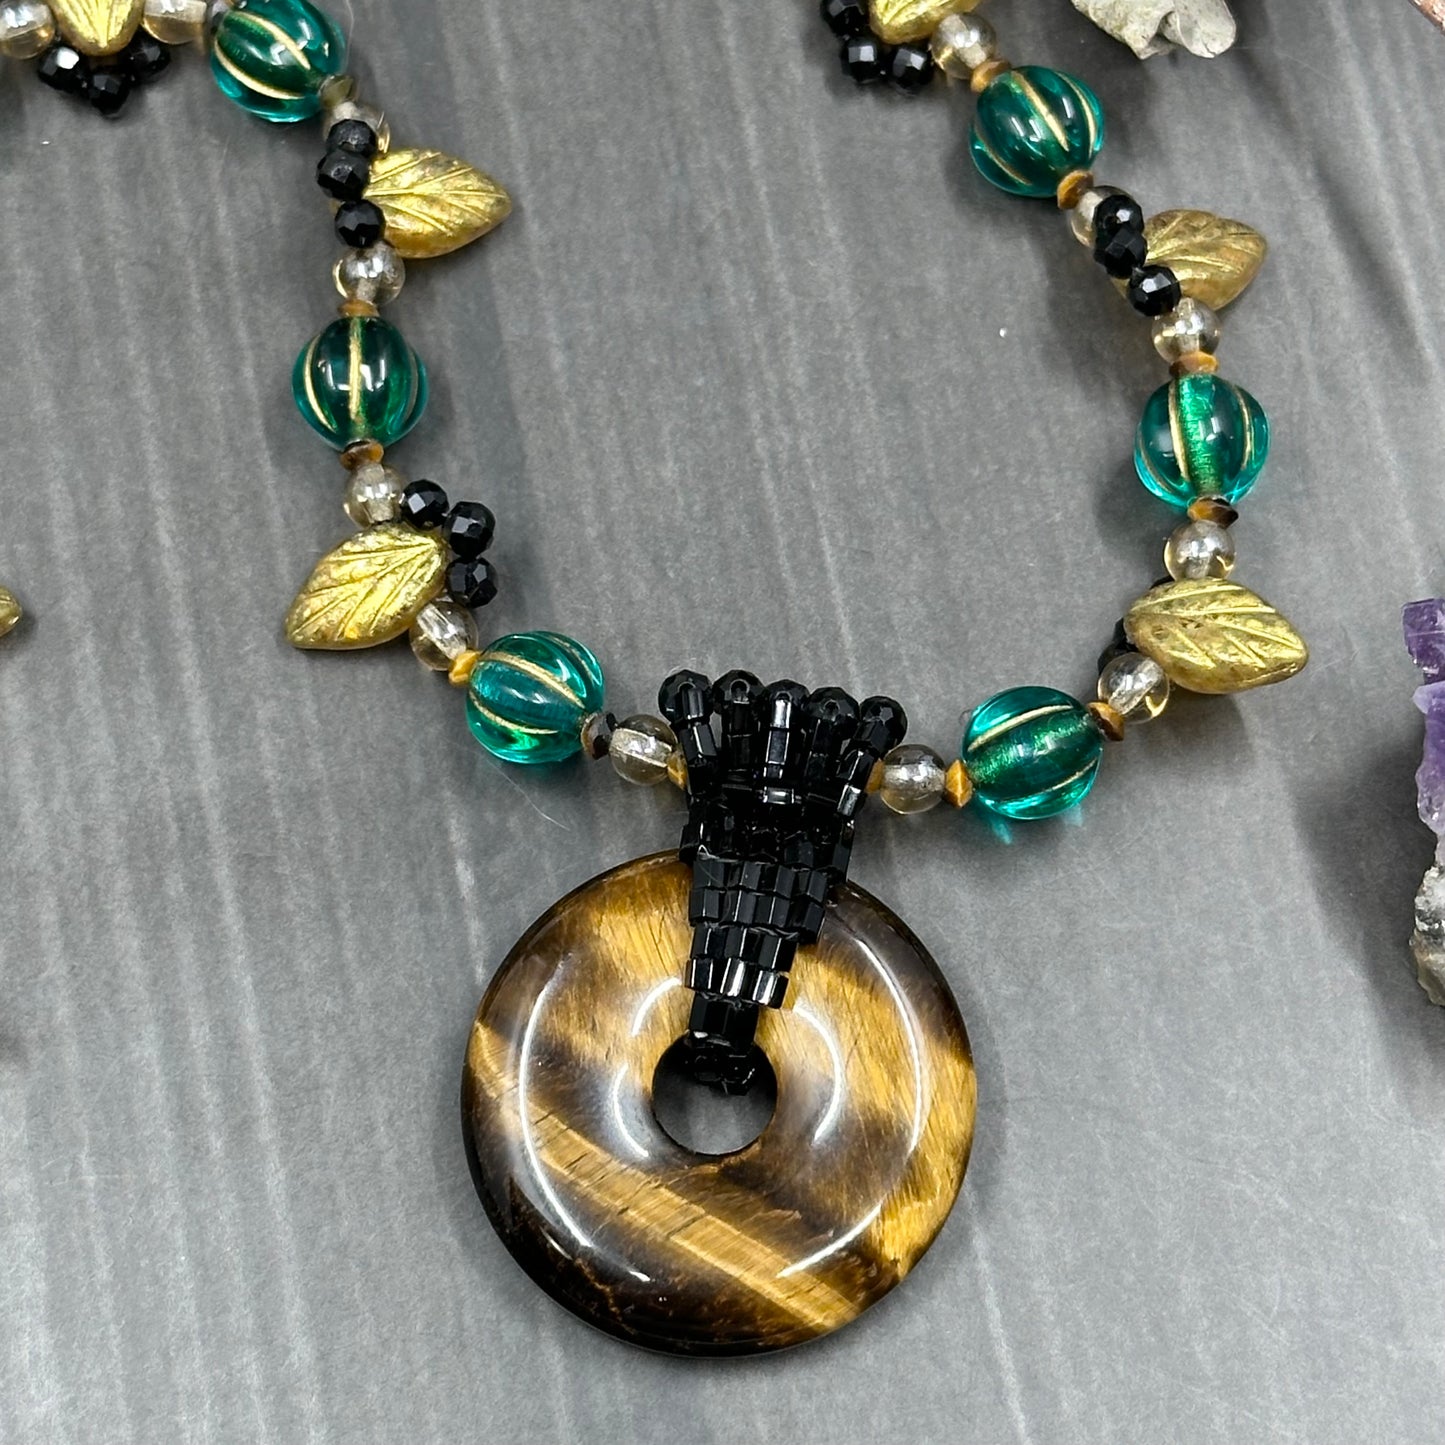 Floral Lace necklace with glass, tiger eye, and black tourmaline